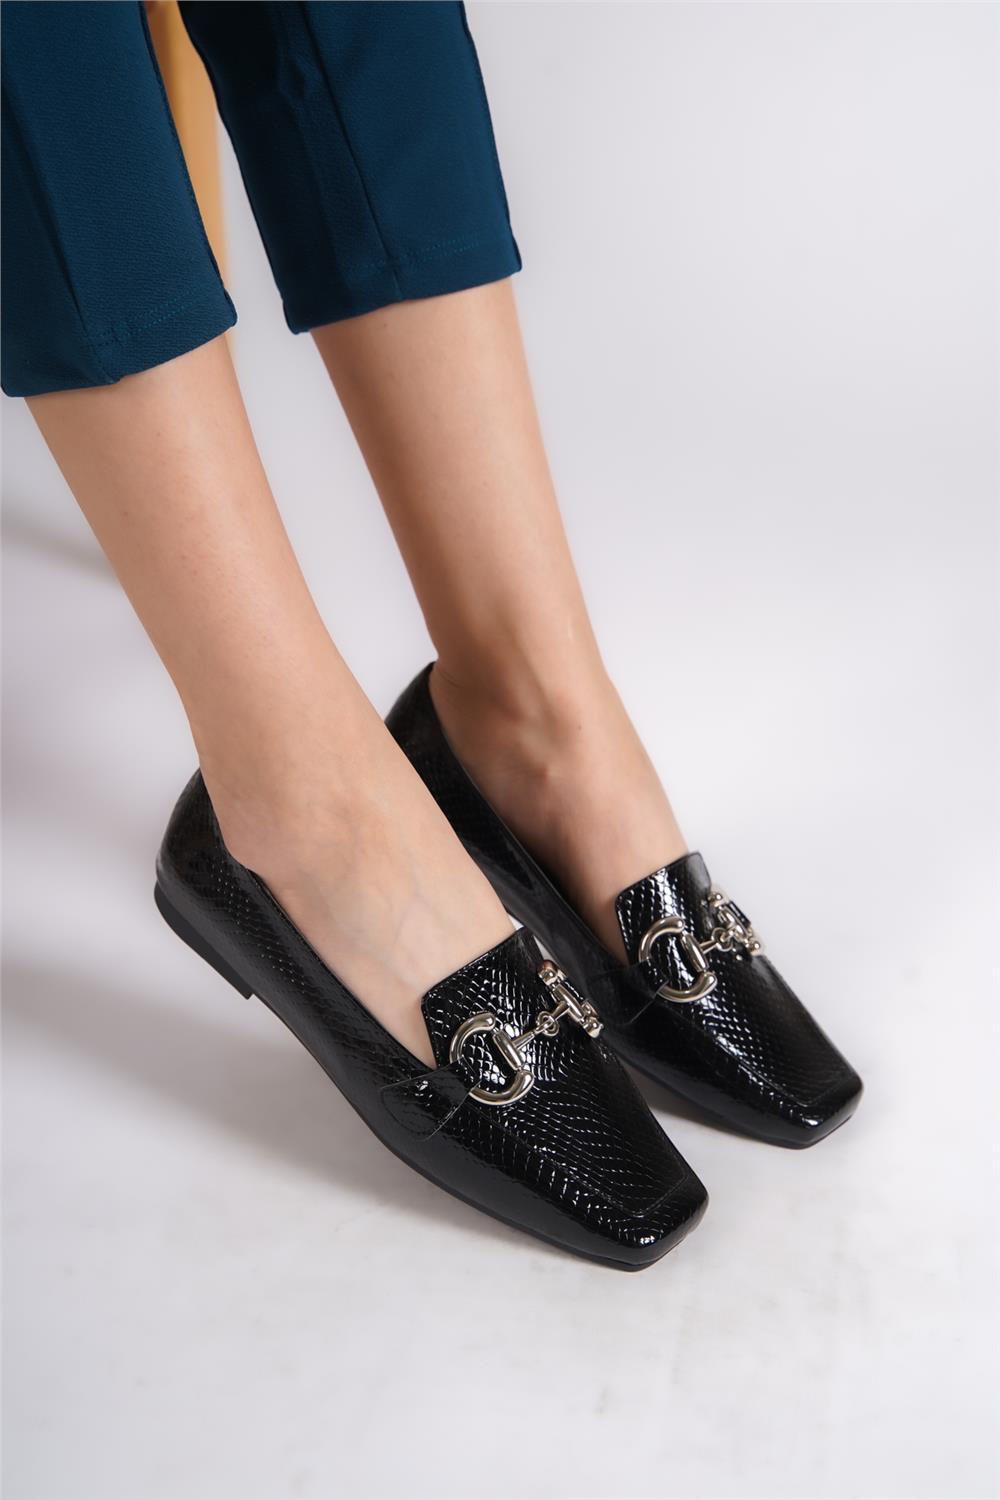 Capone Flat Toe Women Black Loafers With Metal Heart Buckle Accessory